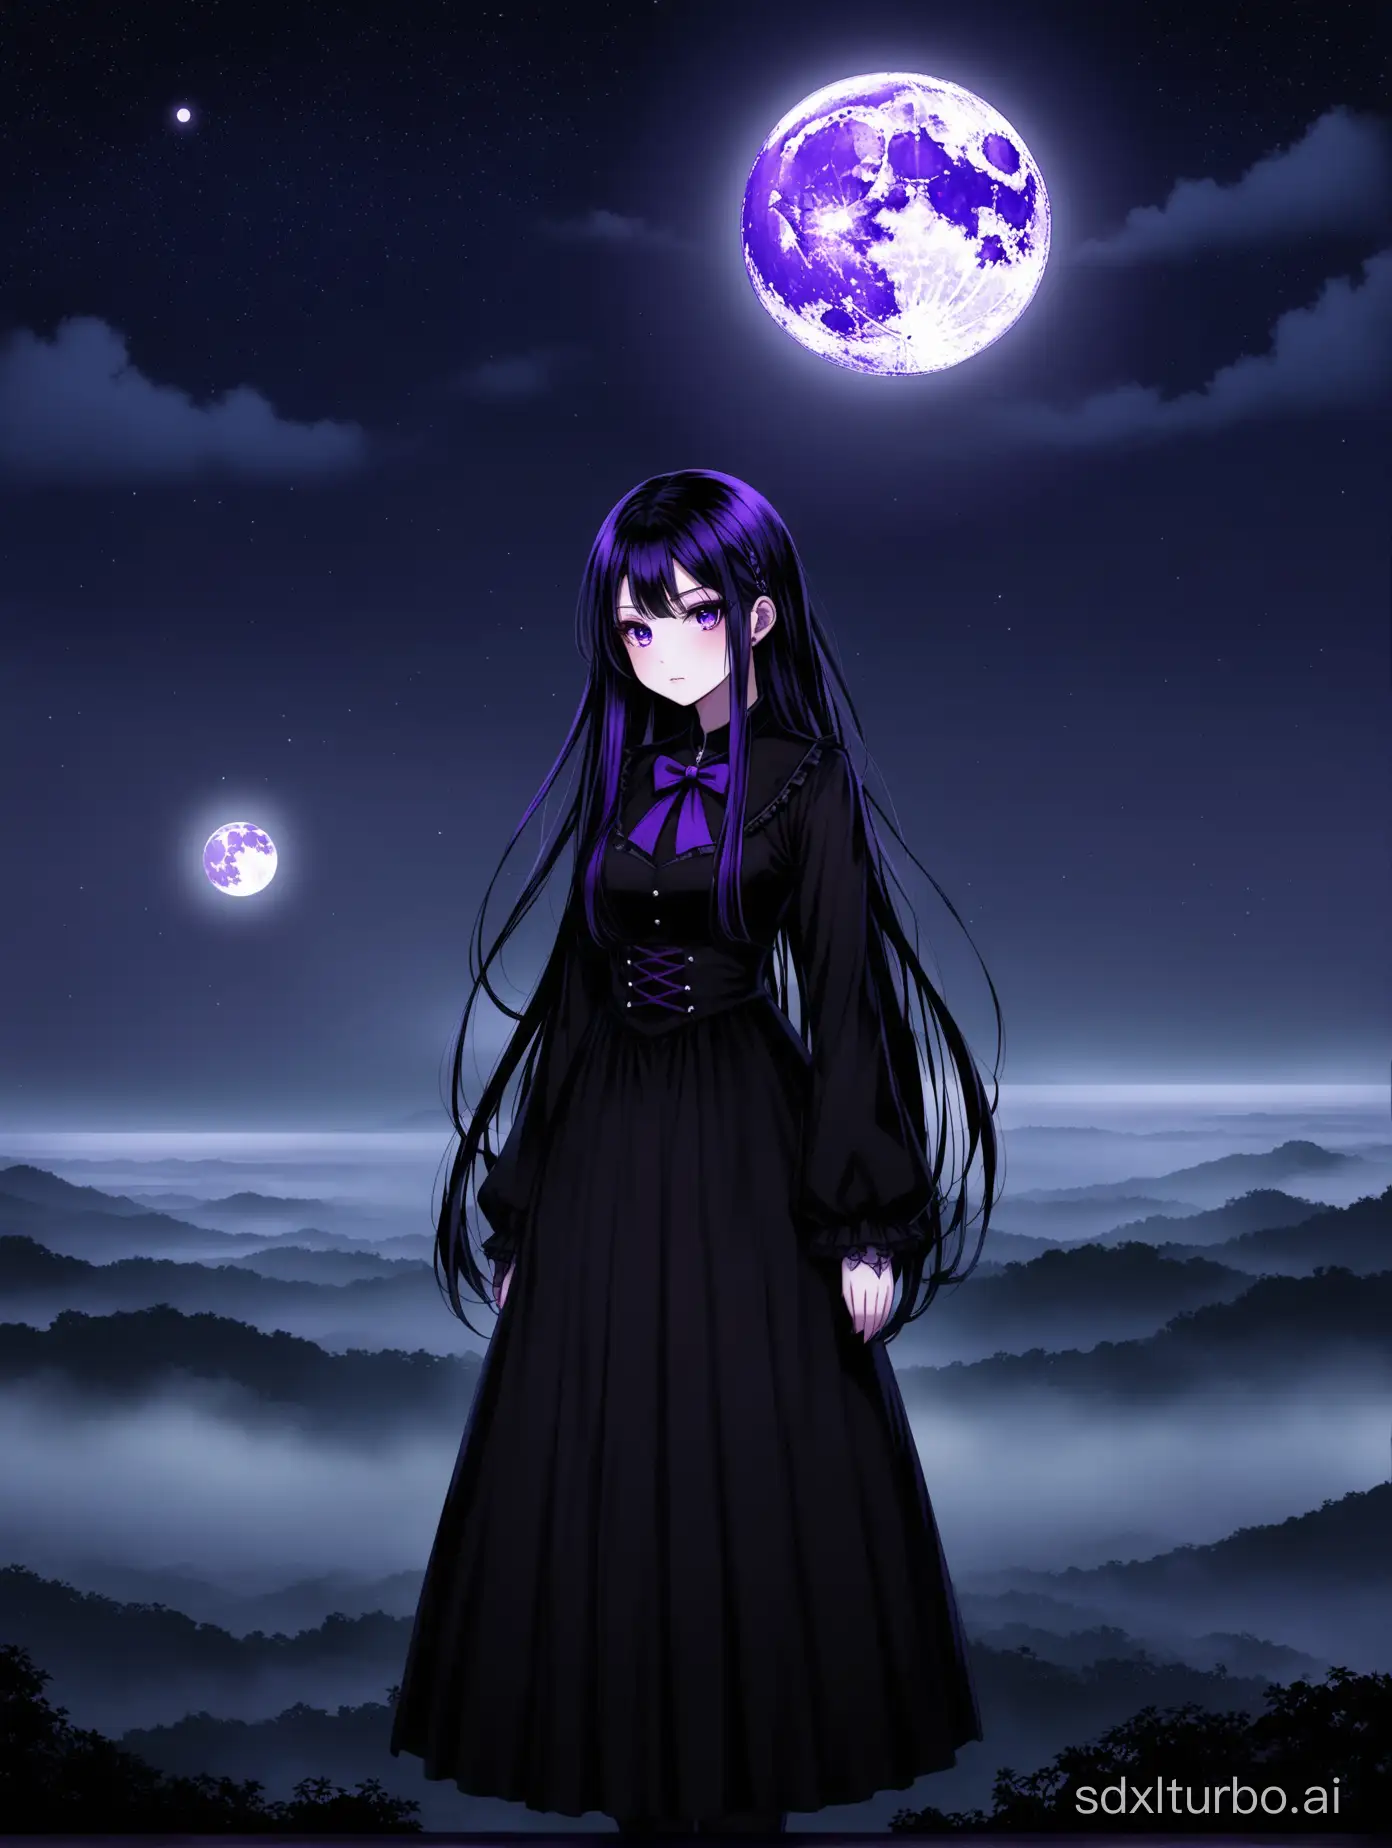 Lonely-Goth-Girl-Rei-Hino-with-Purple-Highlights-Amidst-Foggy-Moonlit-Night